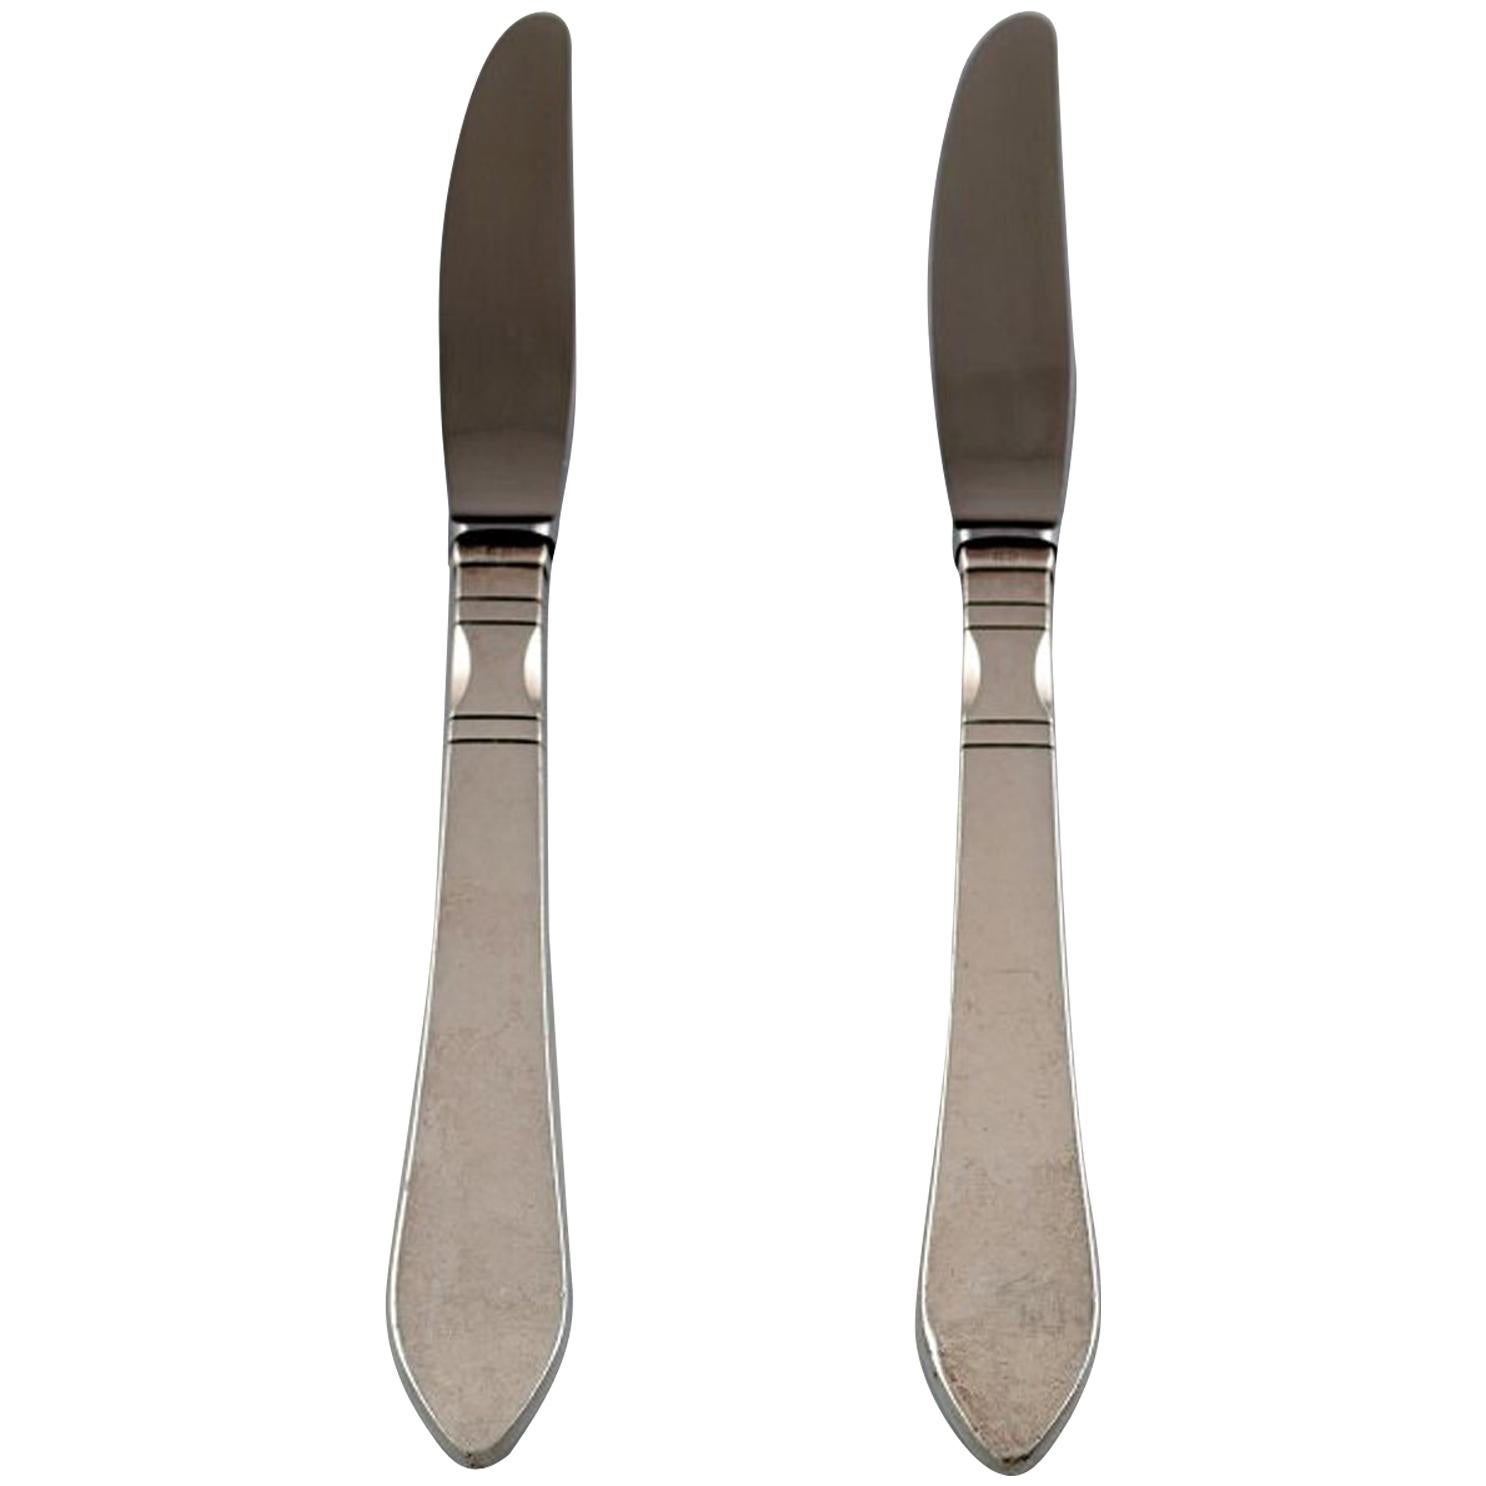 Georg Jensen. Continental, Two Dinner Knife, Silverware, Hand-Hammered For Sale